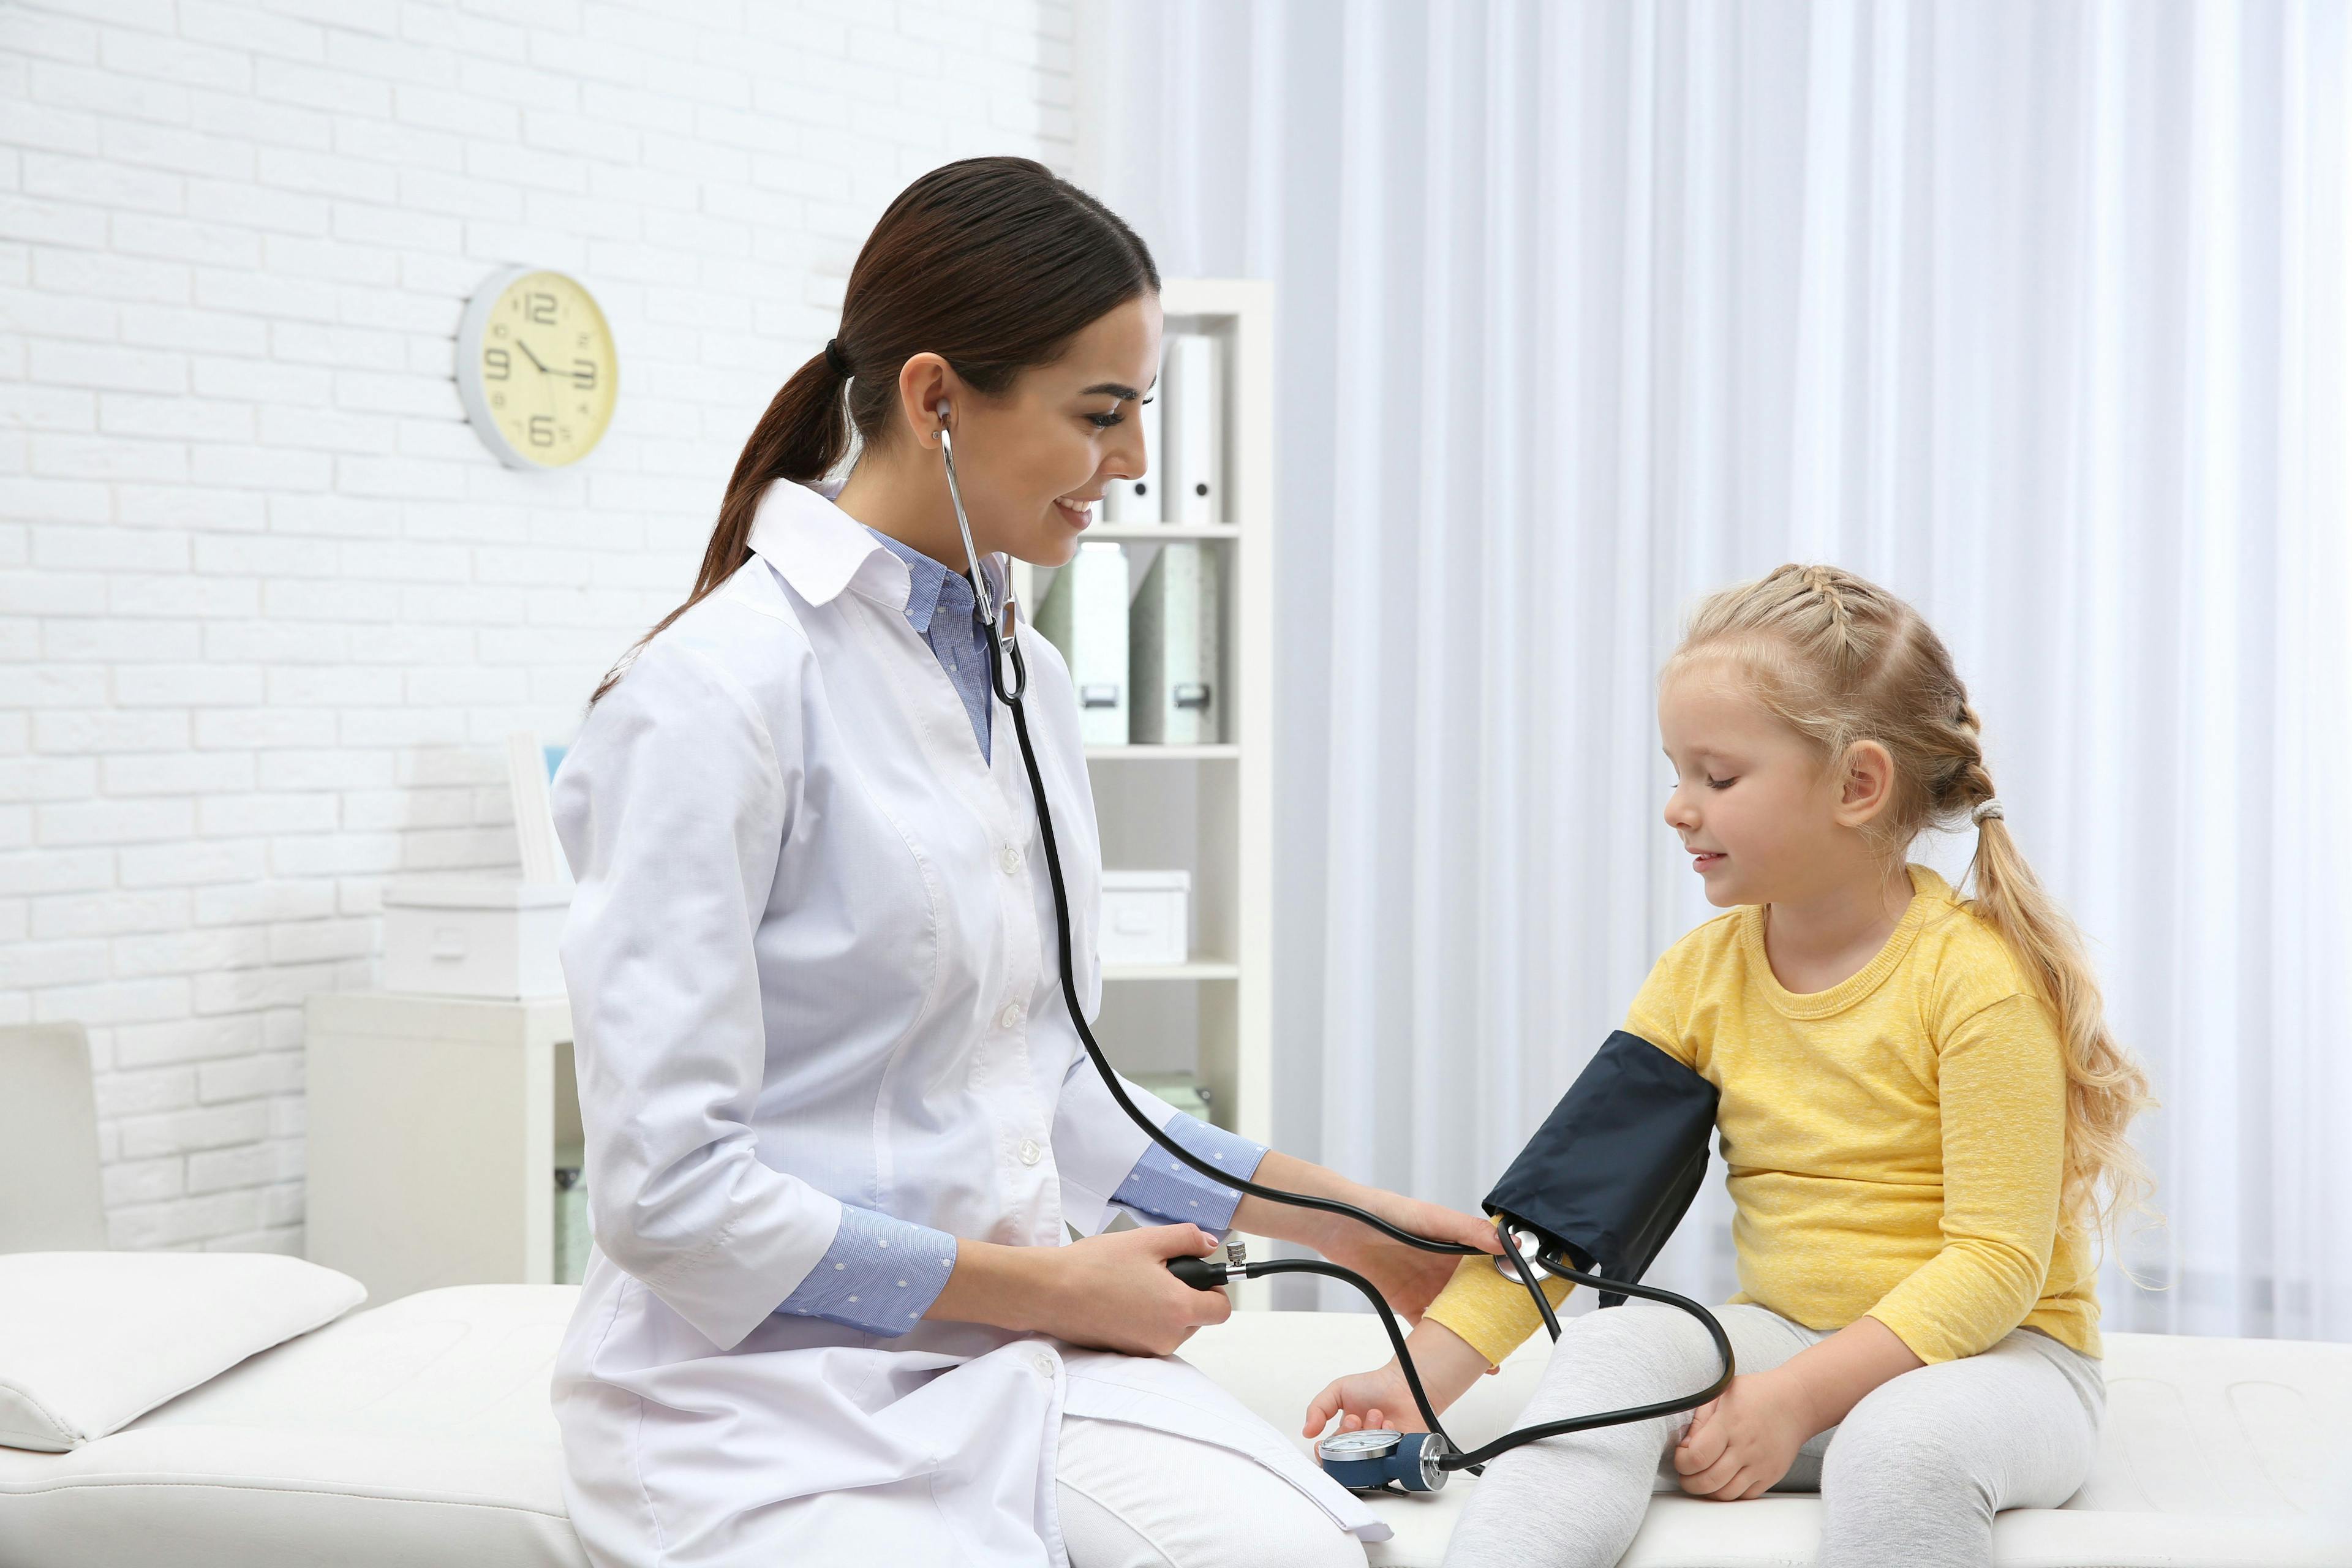 Children with hypertension at higher risk of associated major adverse cardiac events | Image Credit: © New Africa - © New Africa - stock.adobe.com.